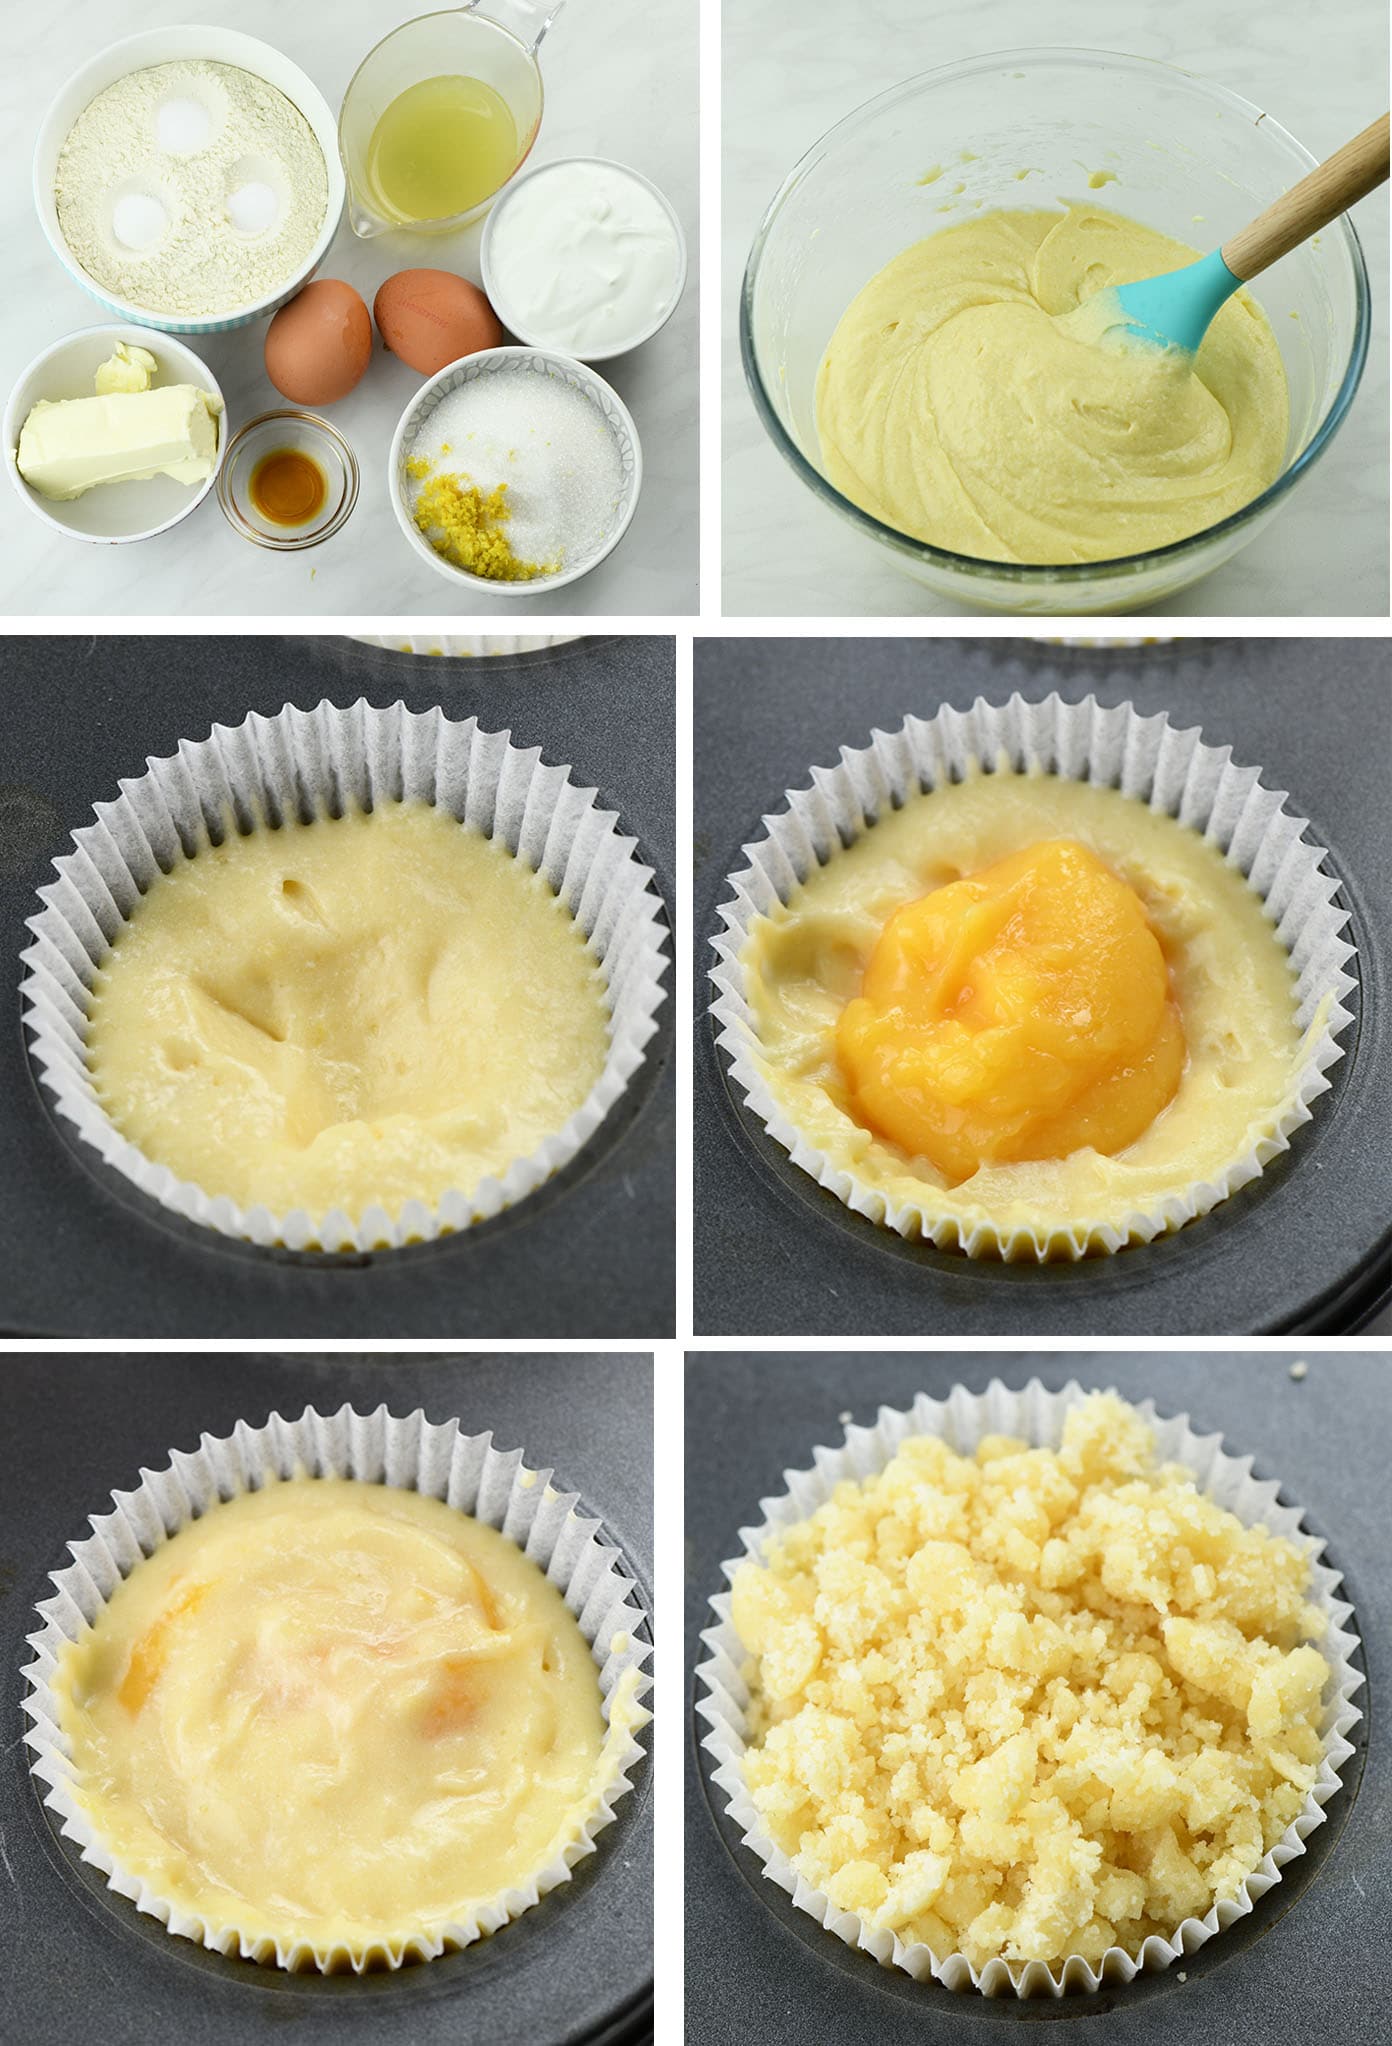 Lemon Curd Muffins step-by-step instructions.